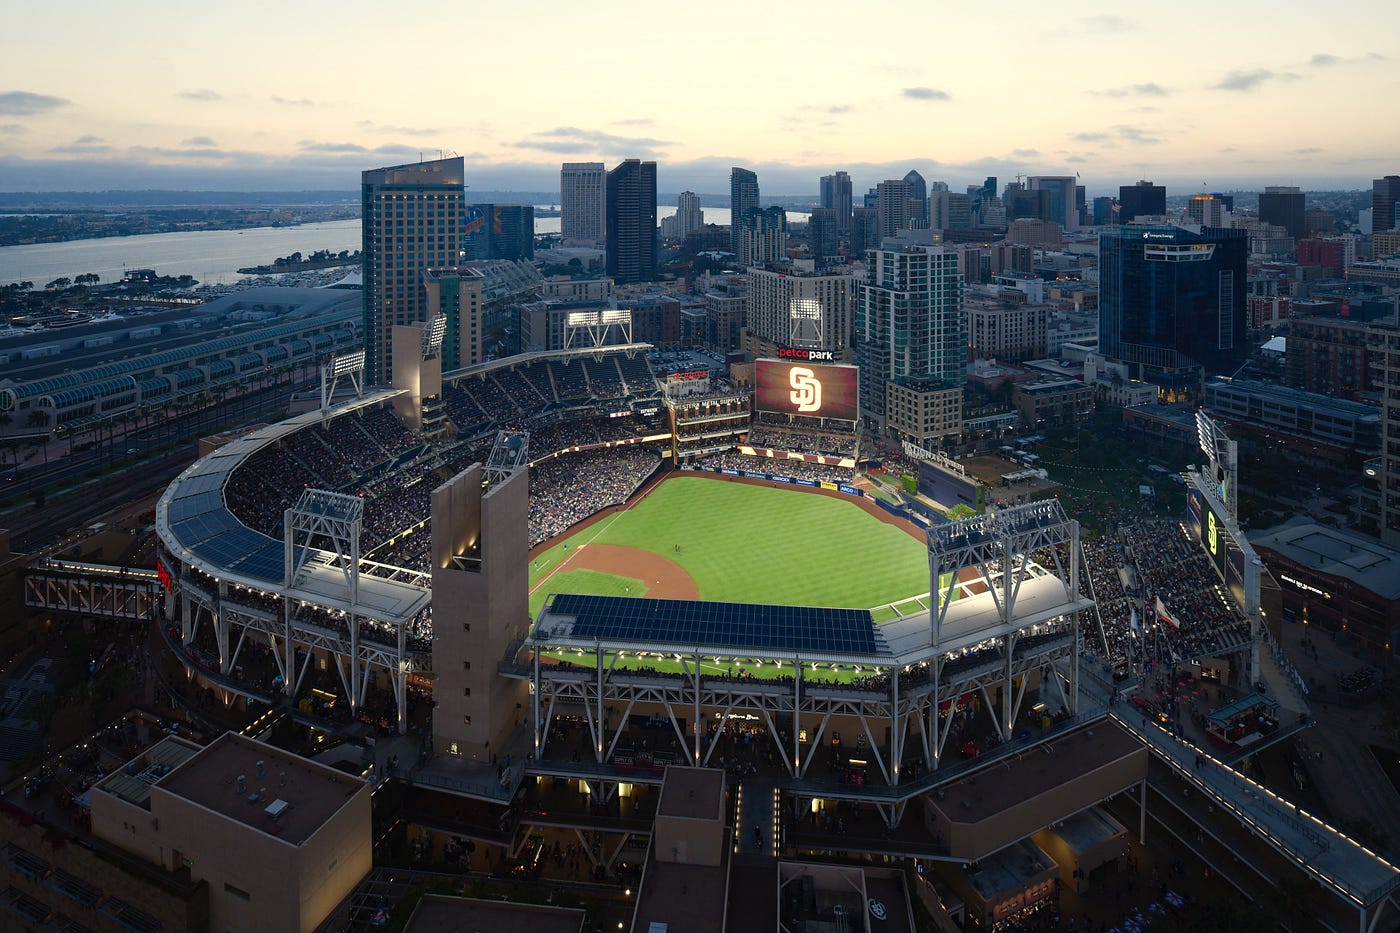 Padres Homestand No. 12 at Petco Park, by FriarWire